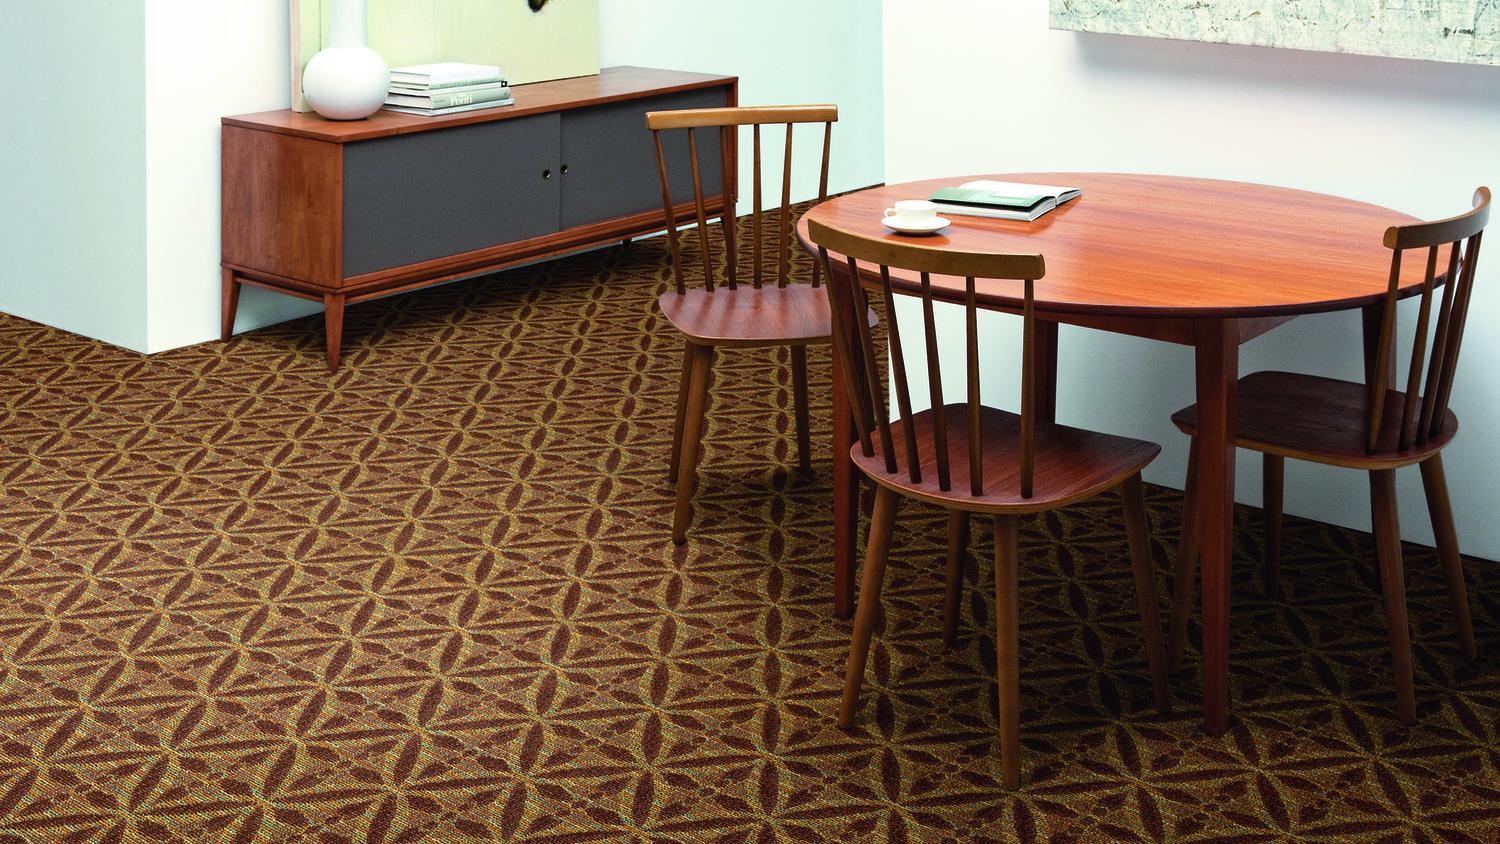 Alhambra is a evocative pattern recreates the look of intricately